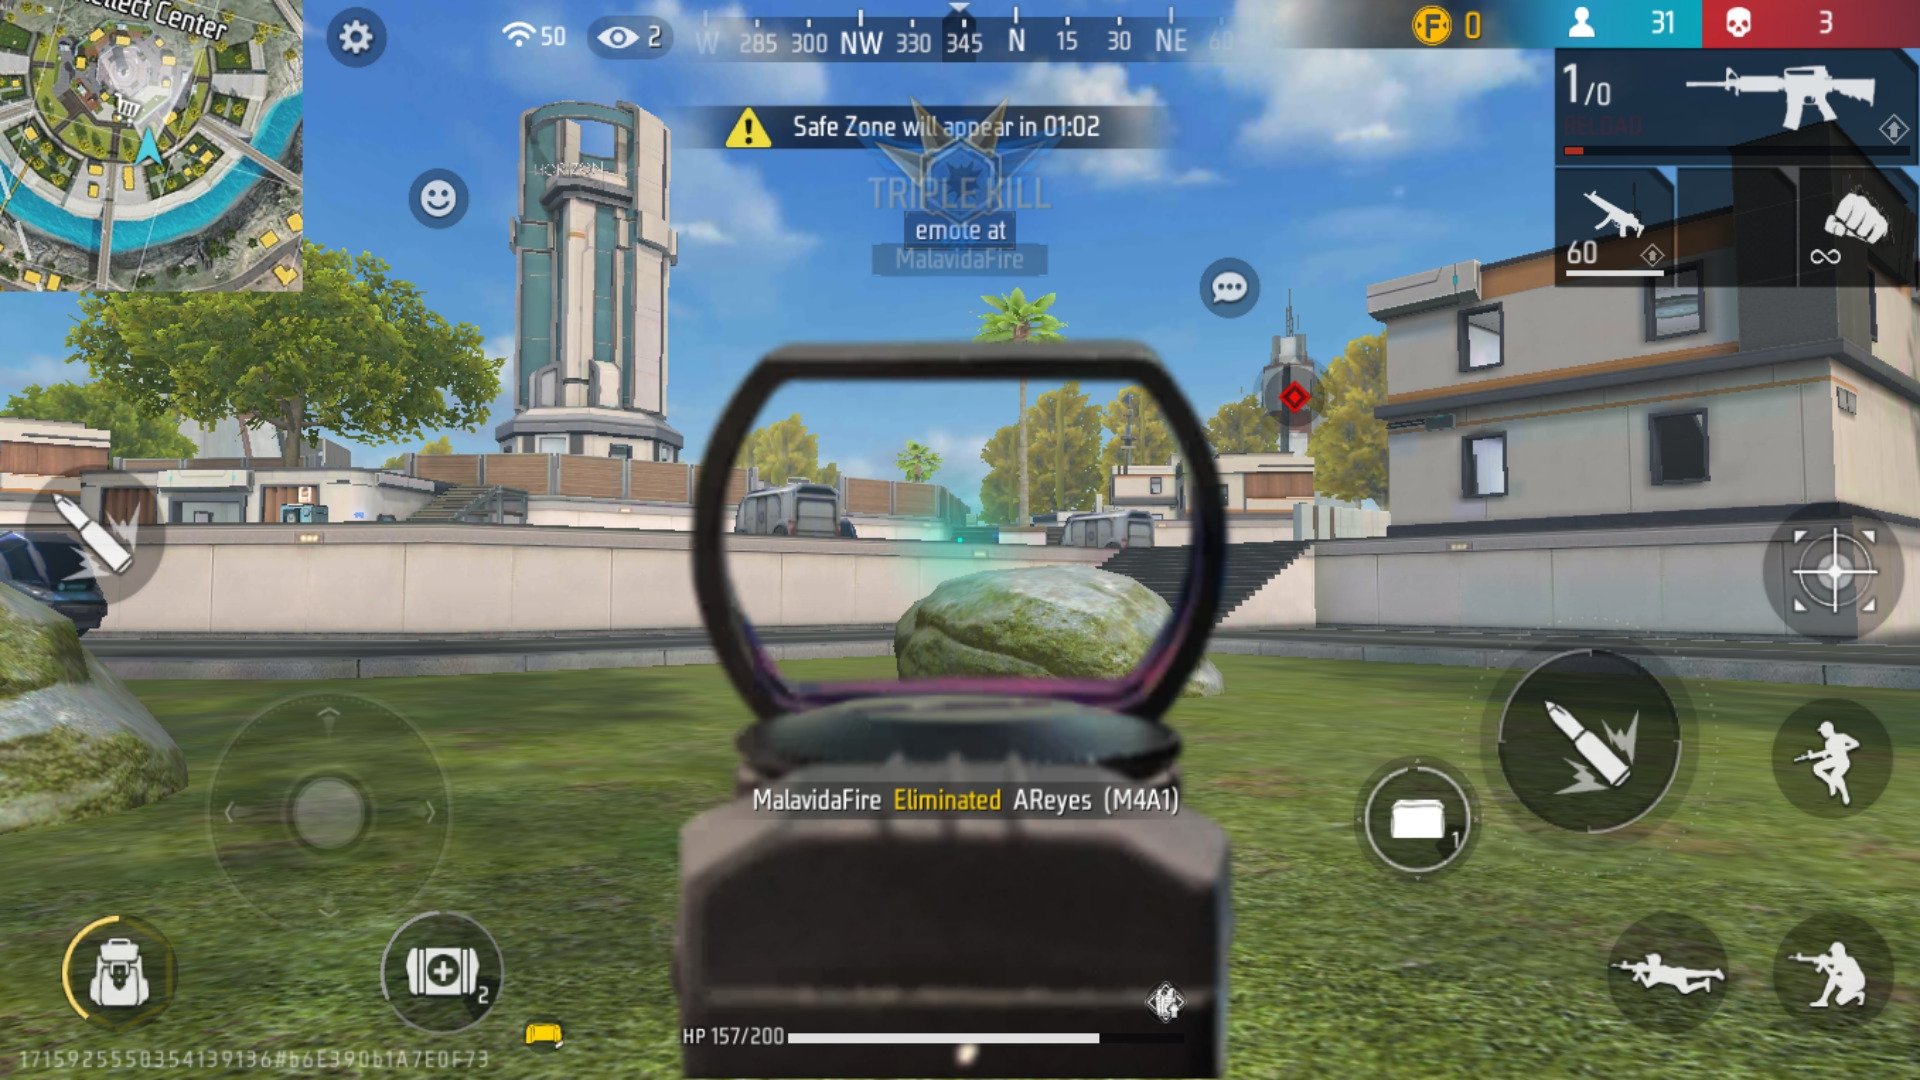 Free Fire Max download: How to download Free Fire Max on Android and PC,  system requirements, and more